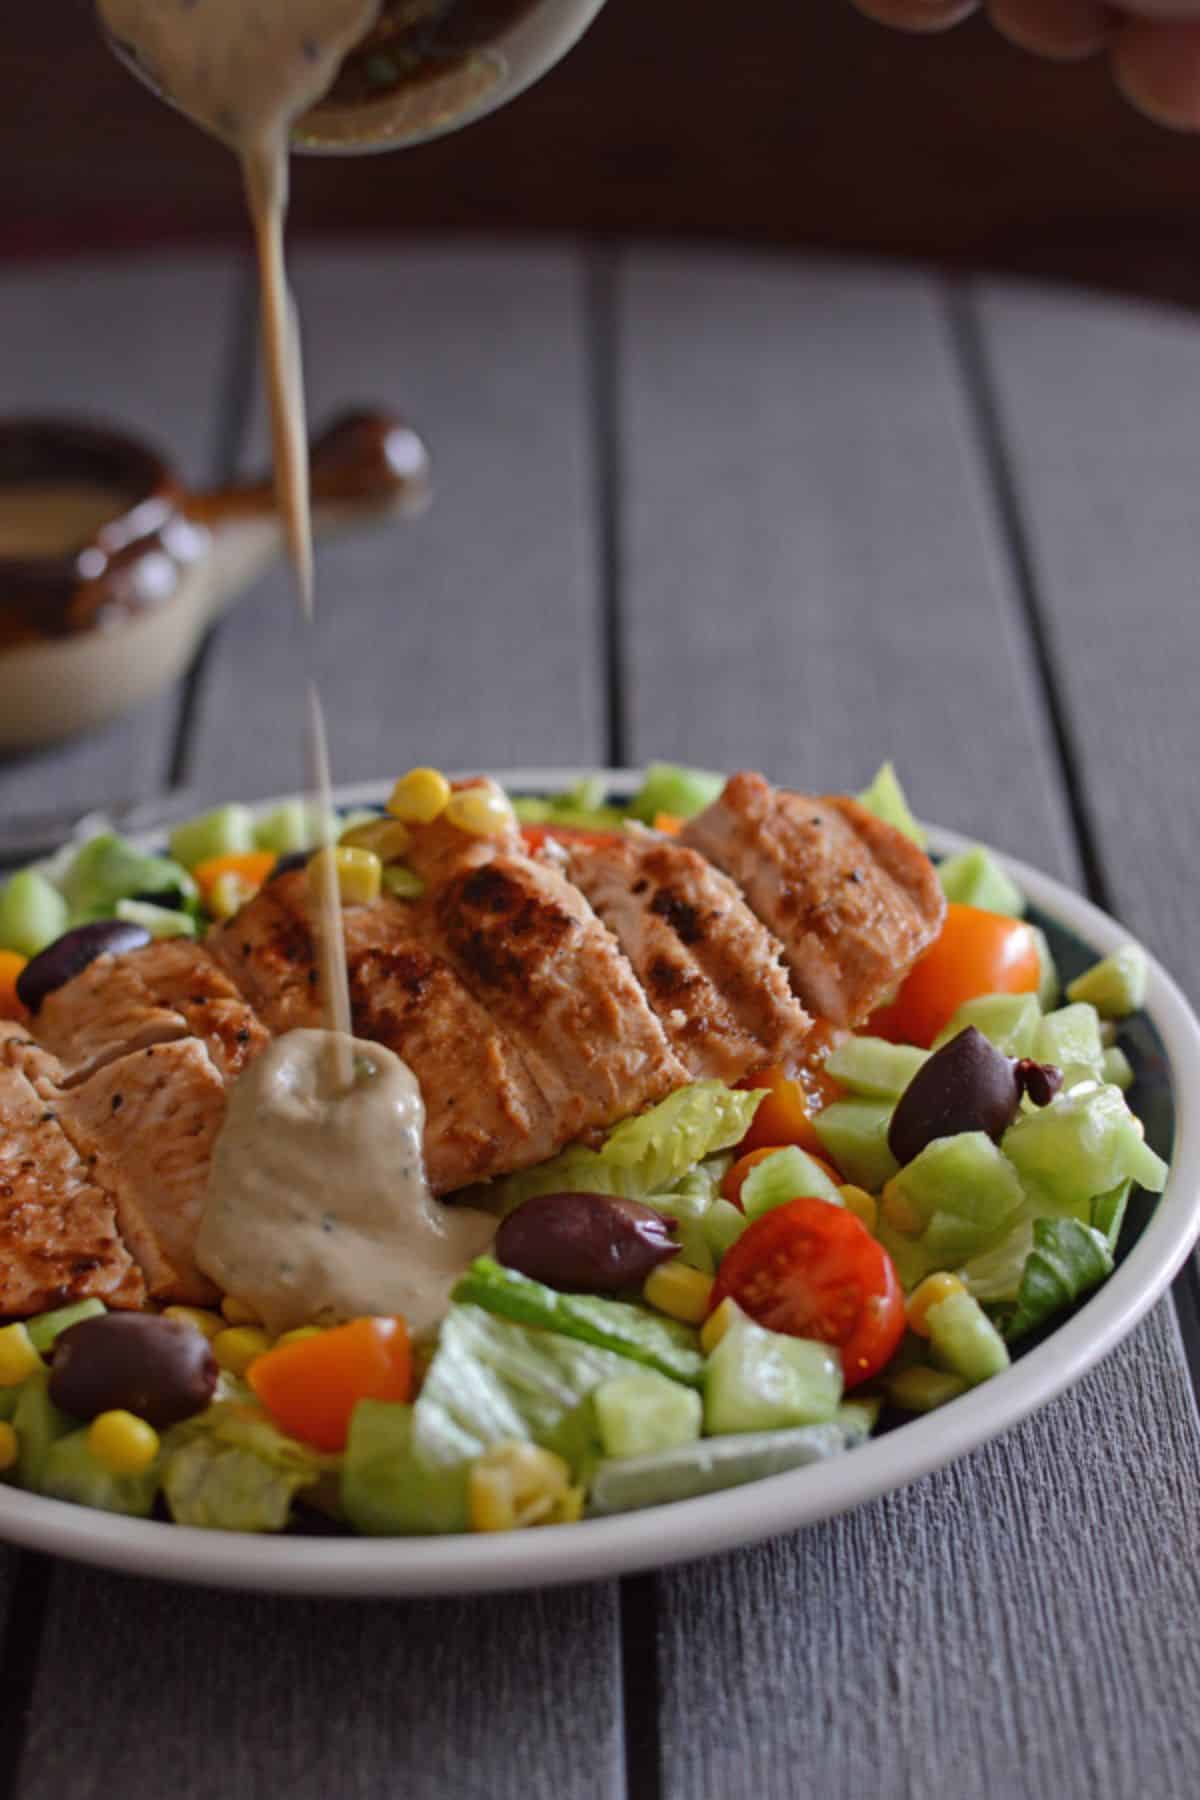 Pouring some kiwi dressing over a plate of grilled chicken salad.